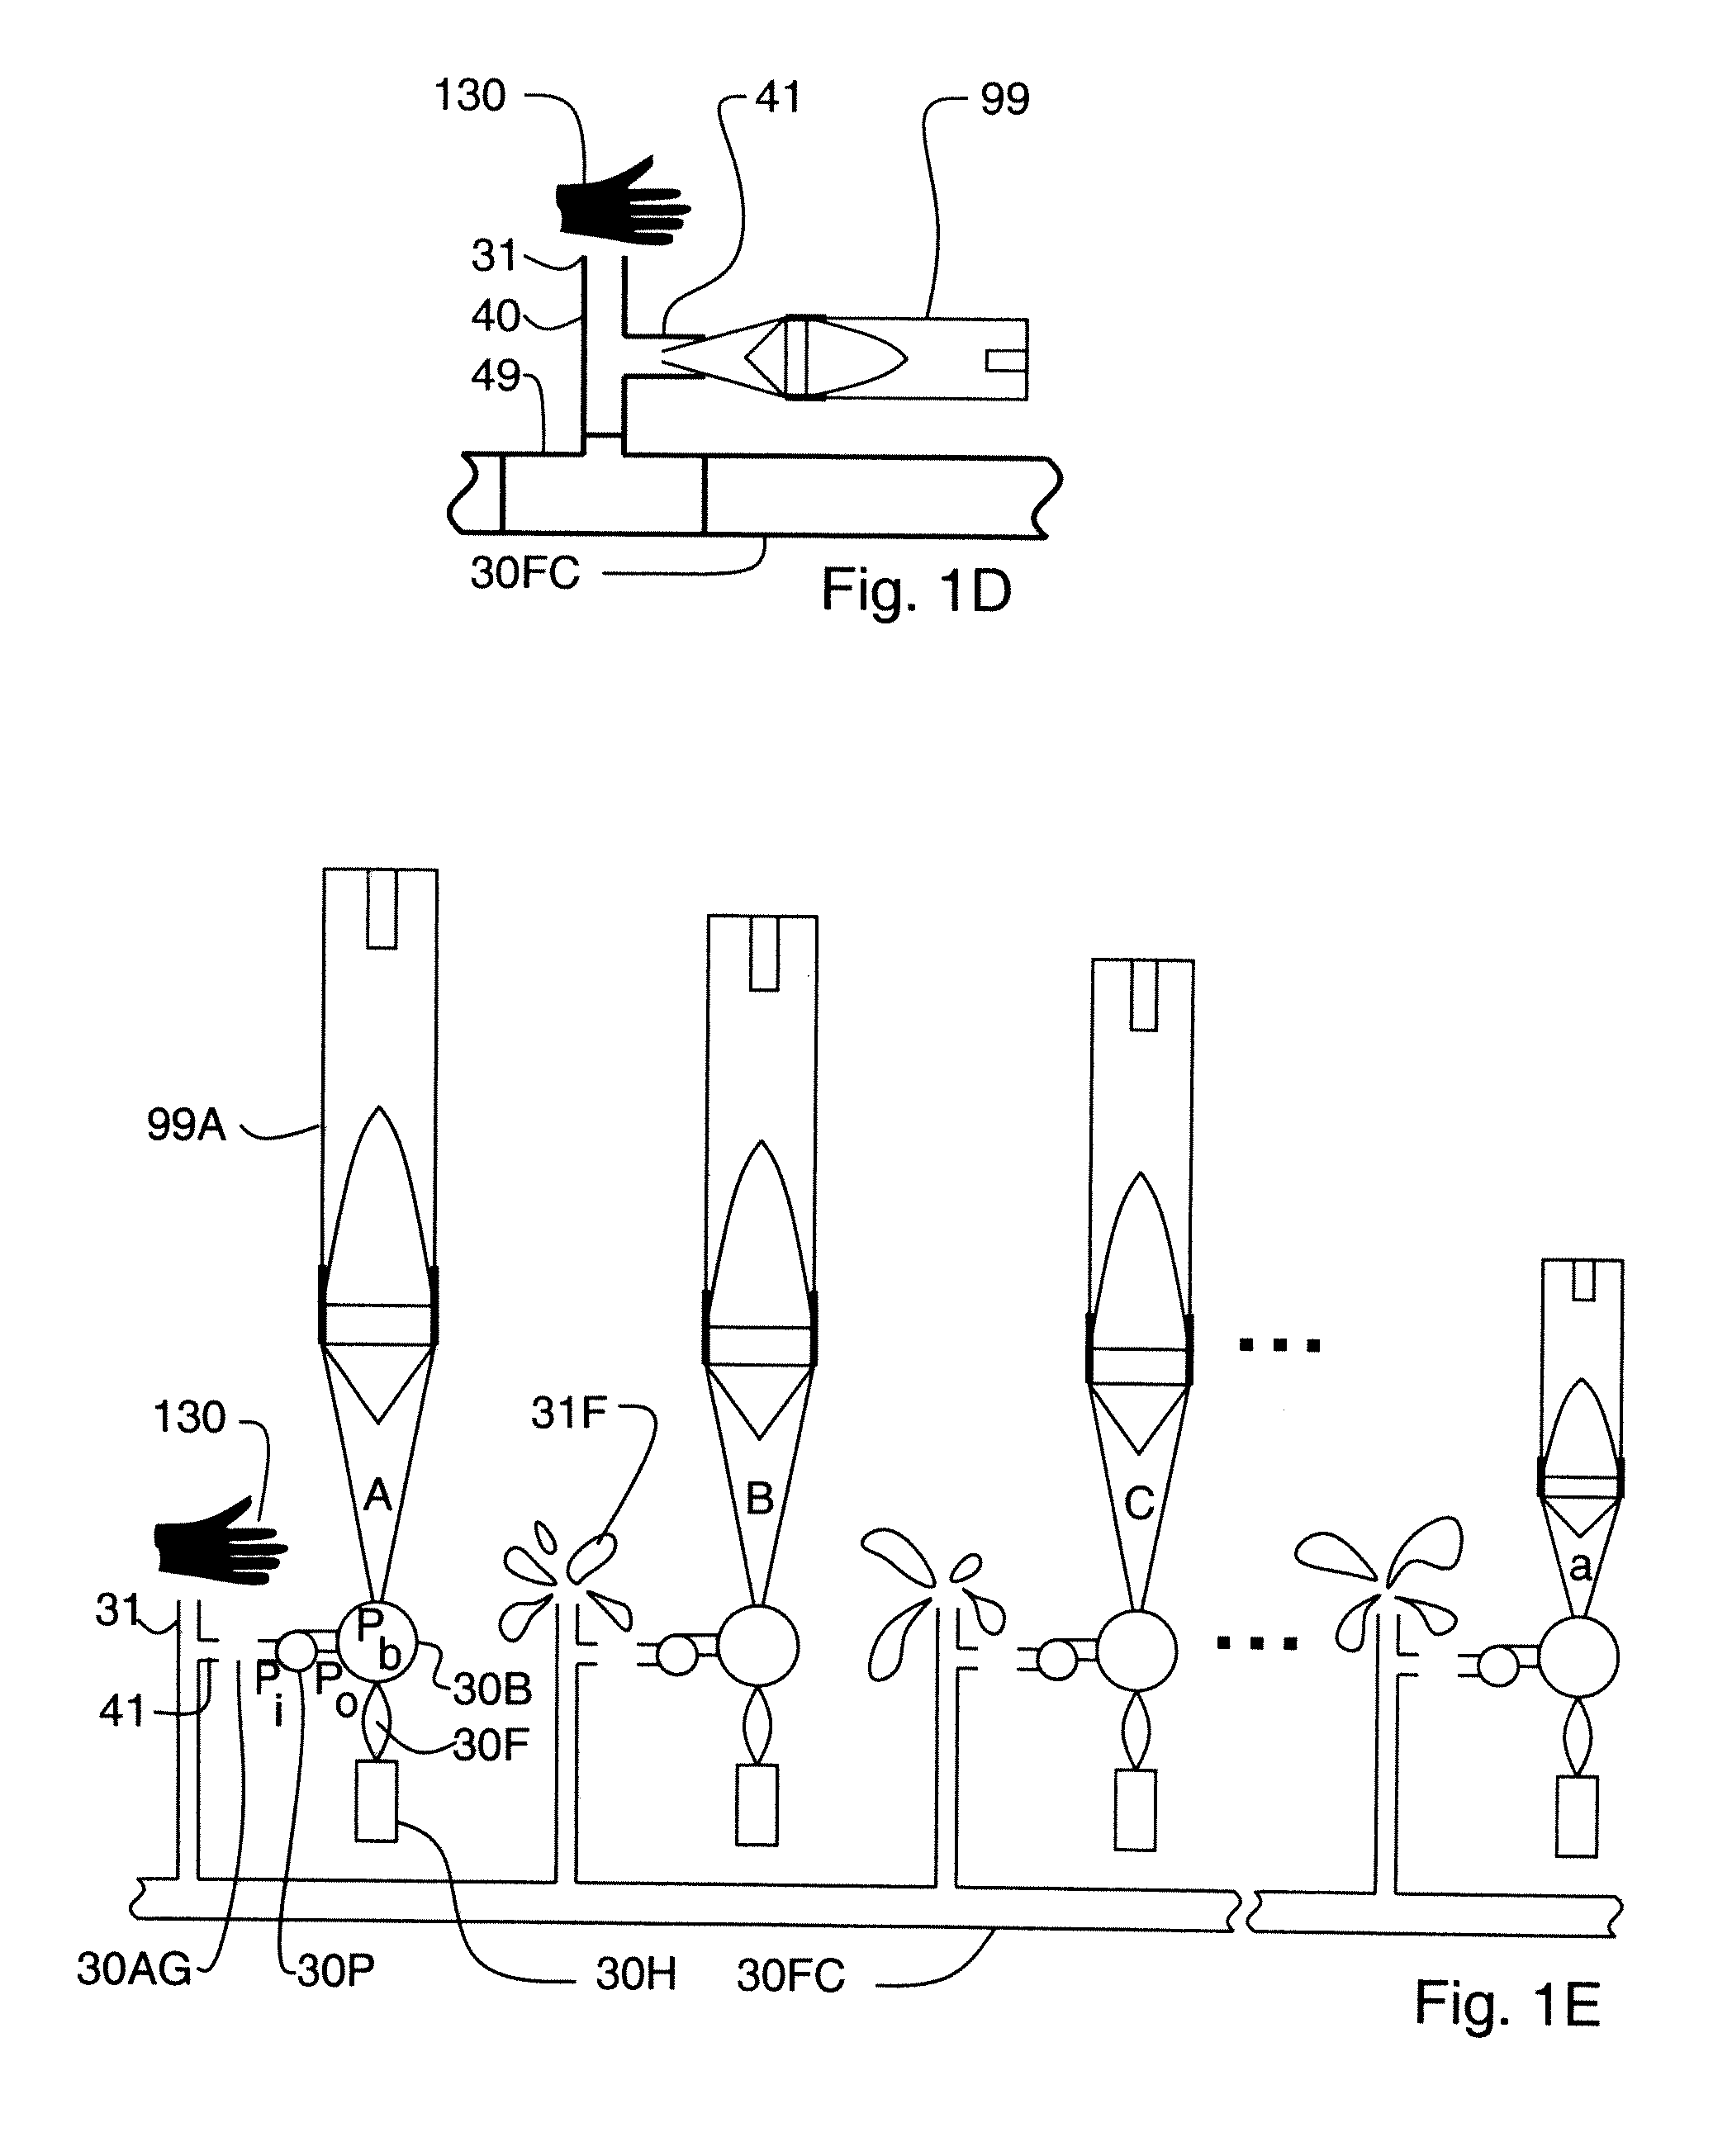 Fluid user interface such as immersive multimediator or iinput/output device with one or more spray jets